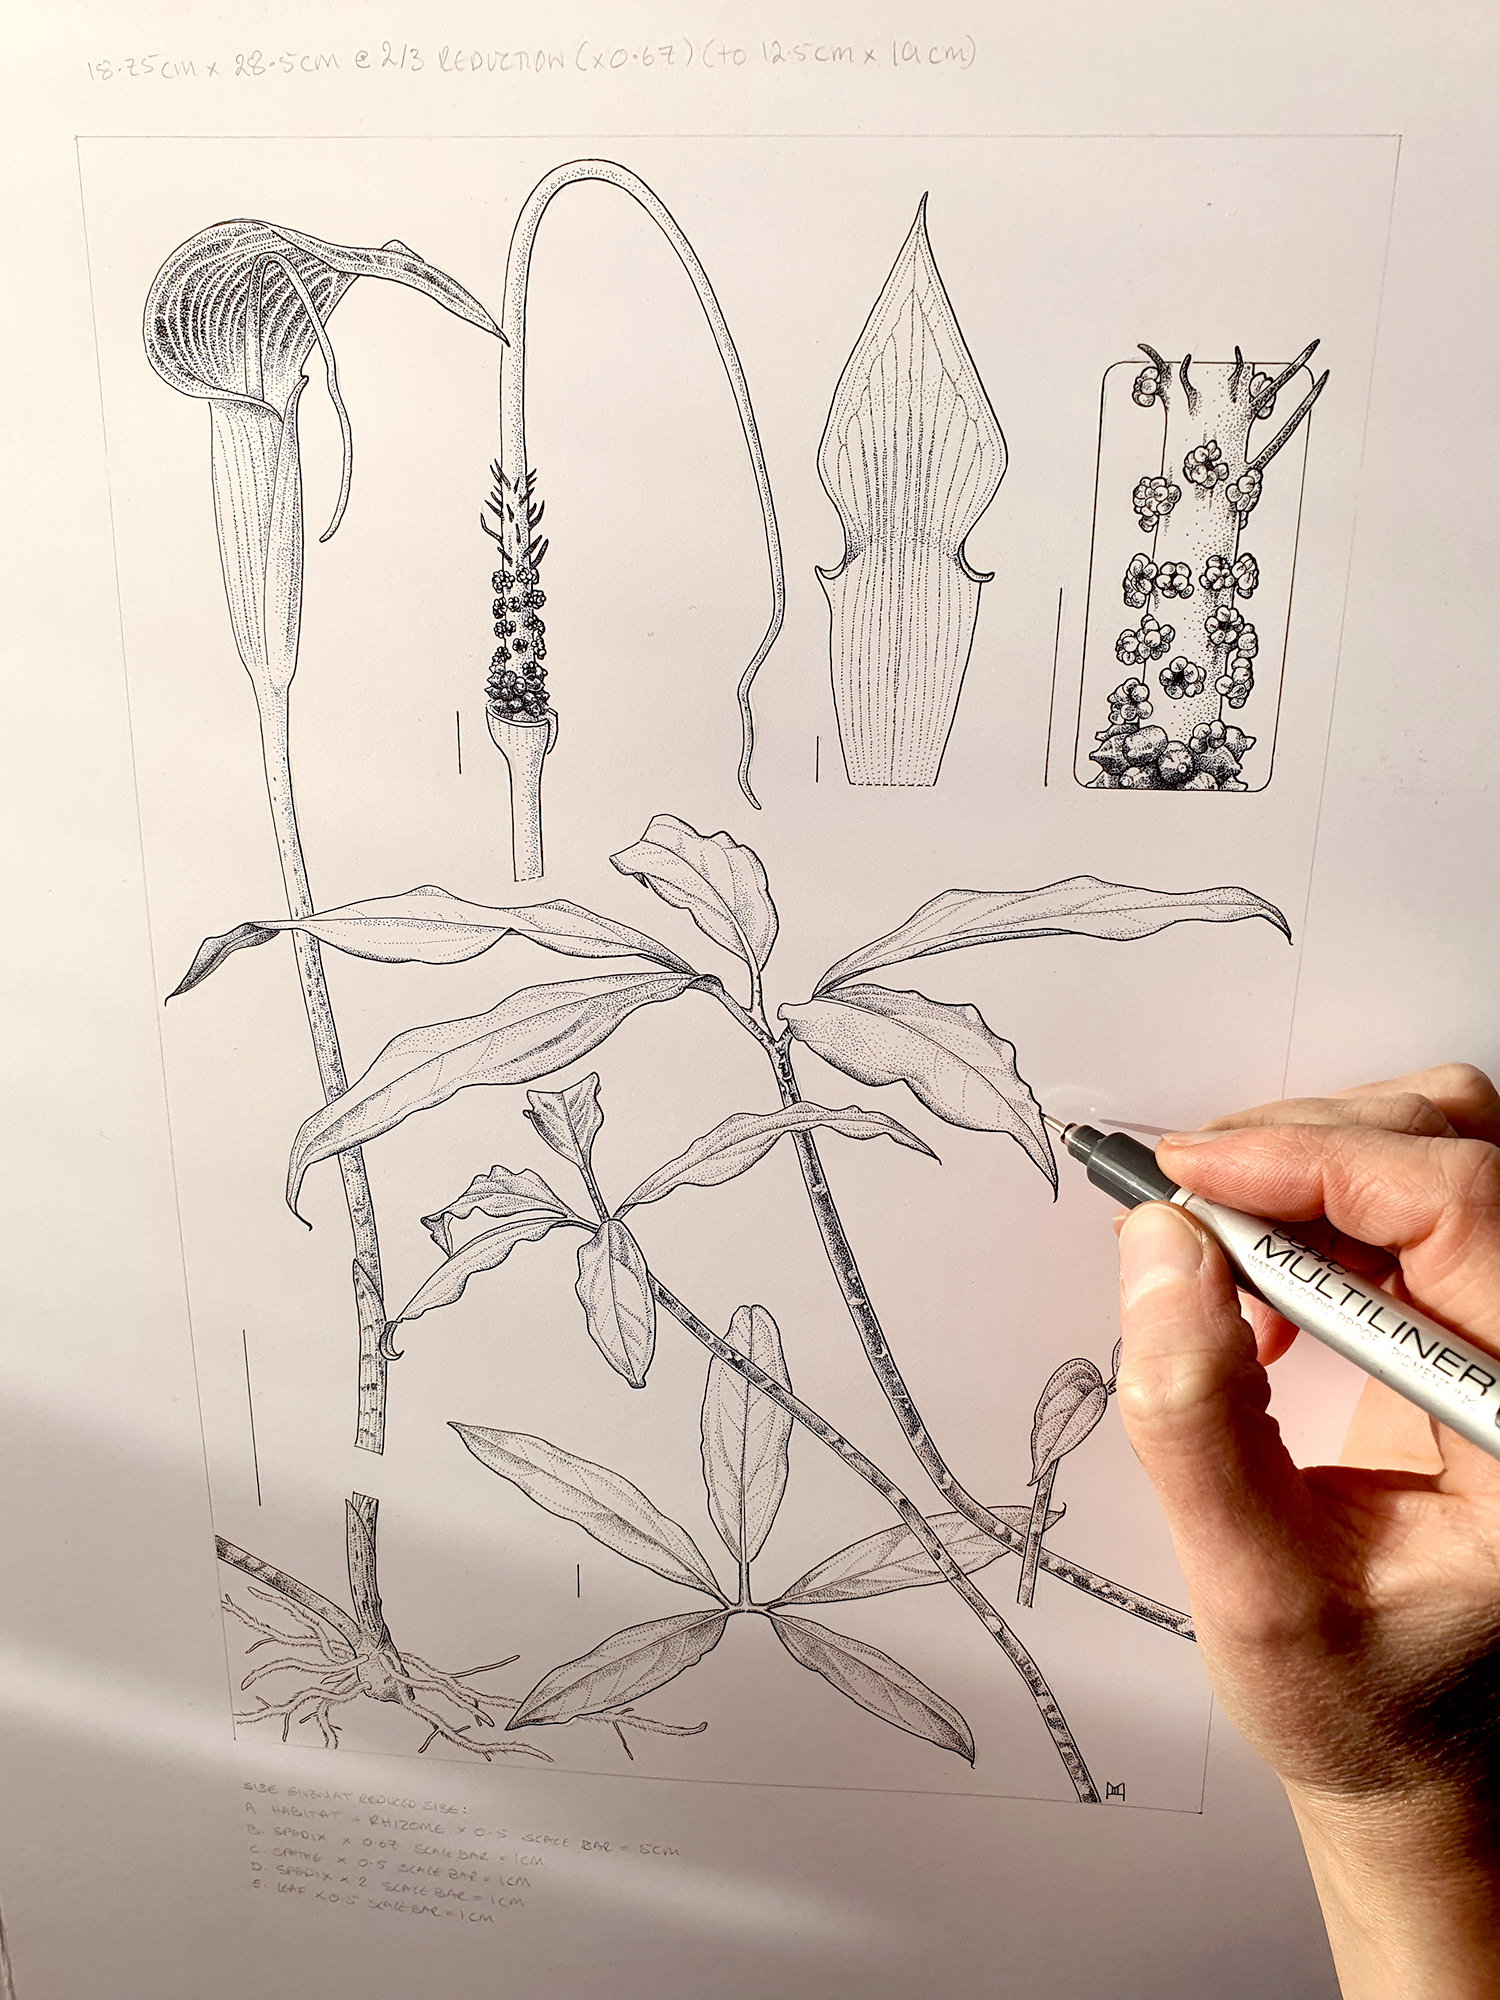 Newly accepted to the RBGE Florilegium - ink drawing of Arisaema sp Nov.